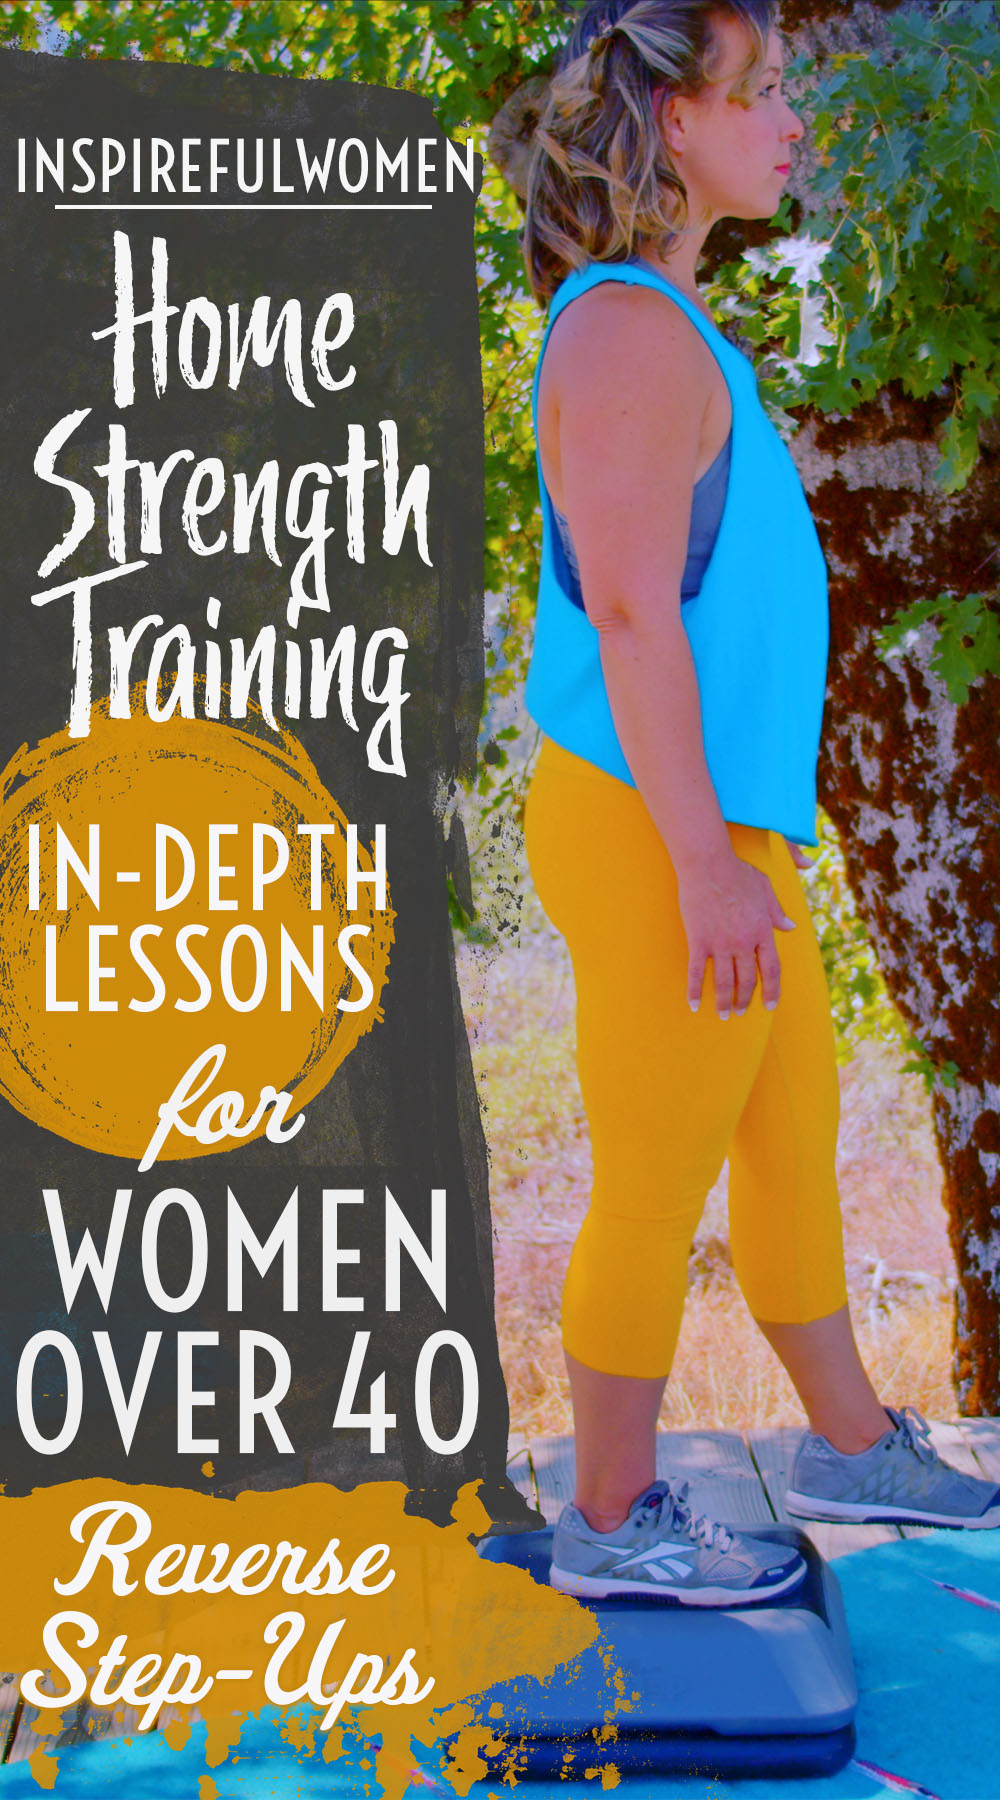 lateral-box-step-ups-quadriceps-gluteus-maximus-lower-body-resistance-exercise-women-40+